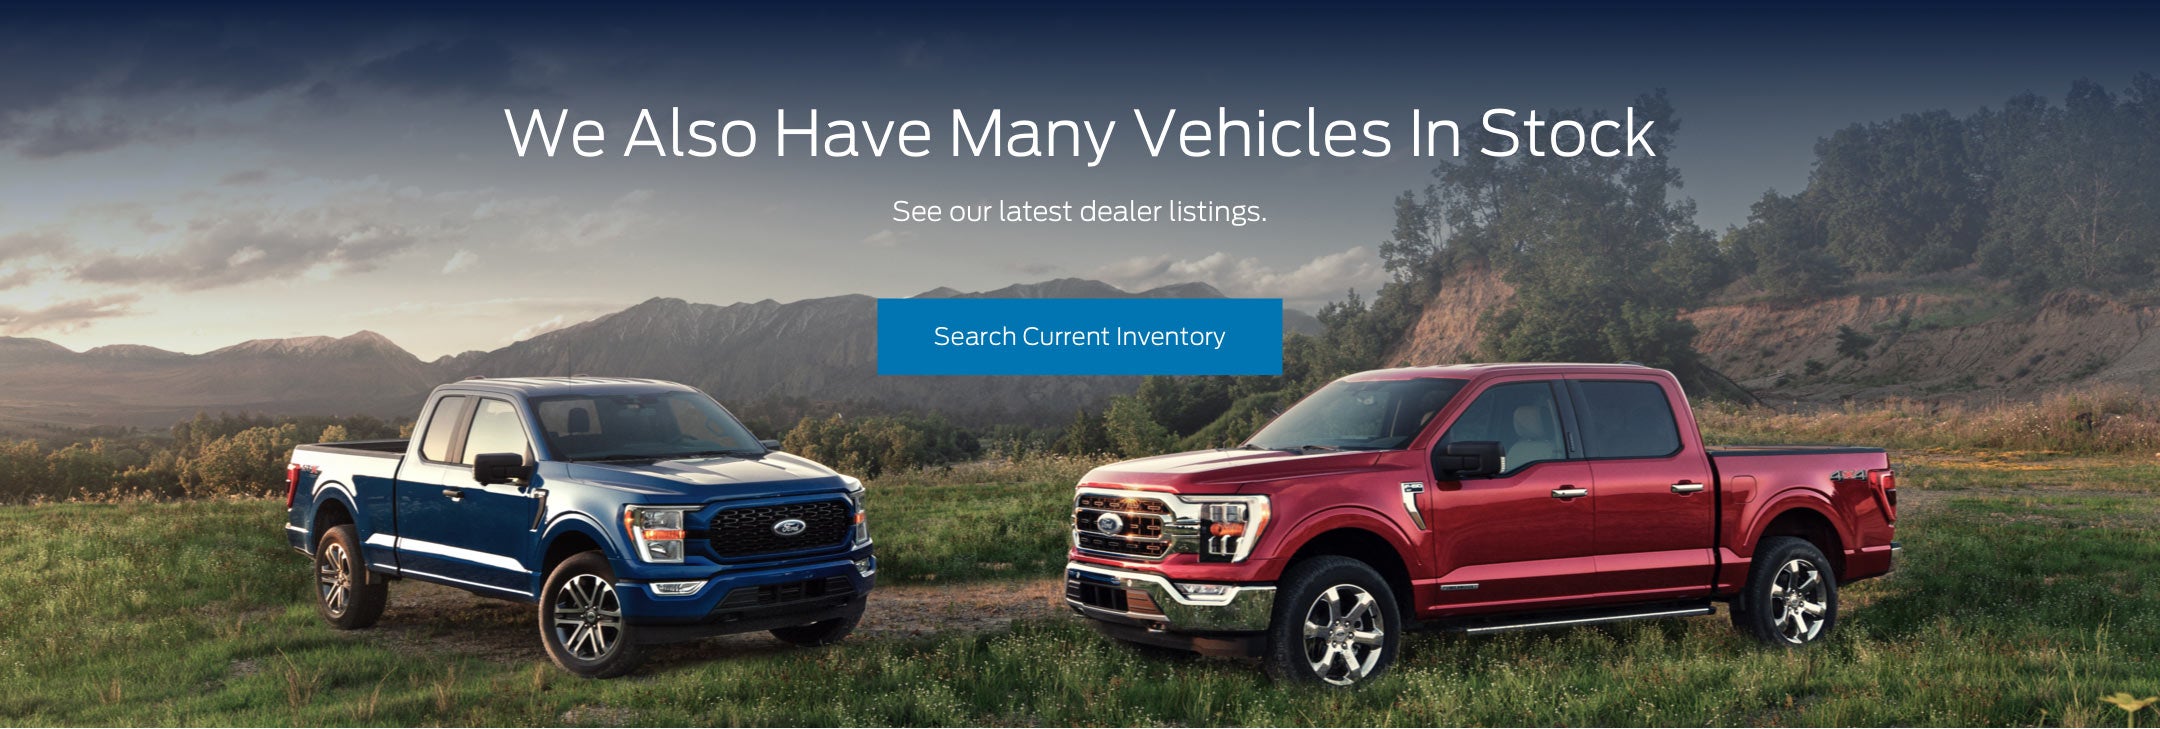 Ford vehicles in stock | Humes Ford of Corry in Corry PA